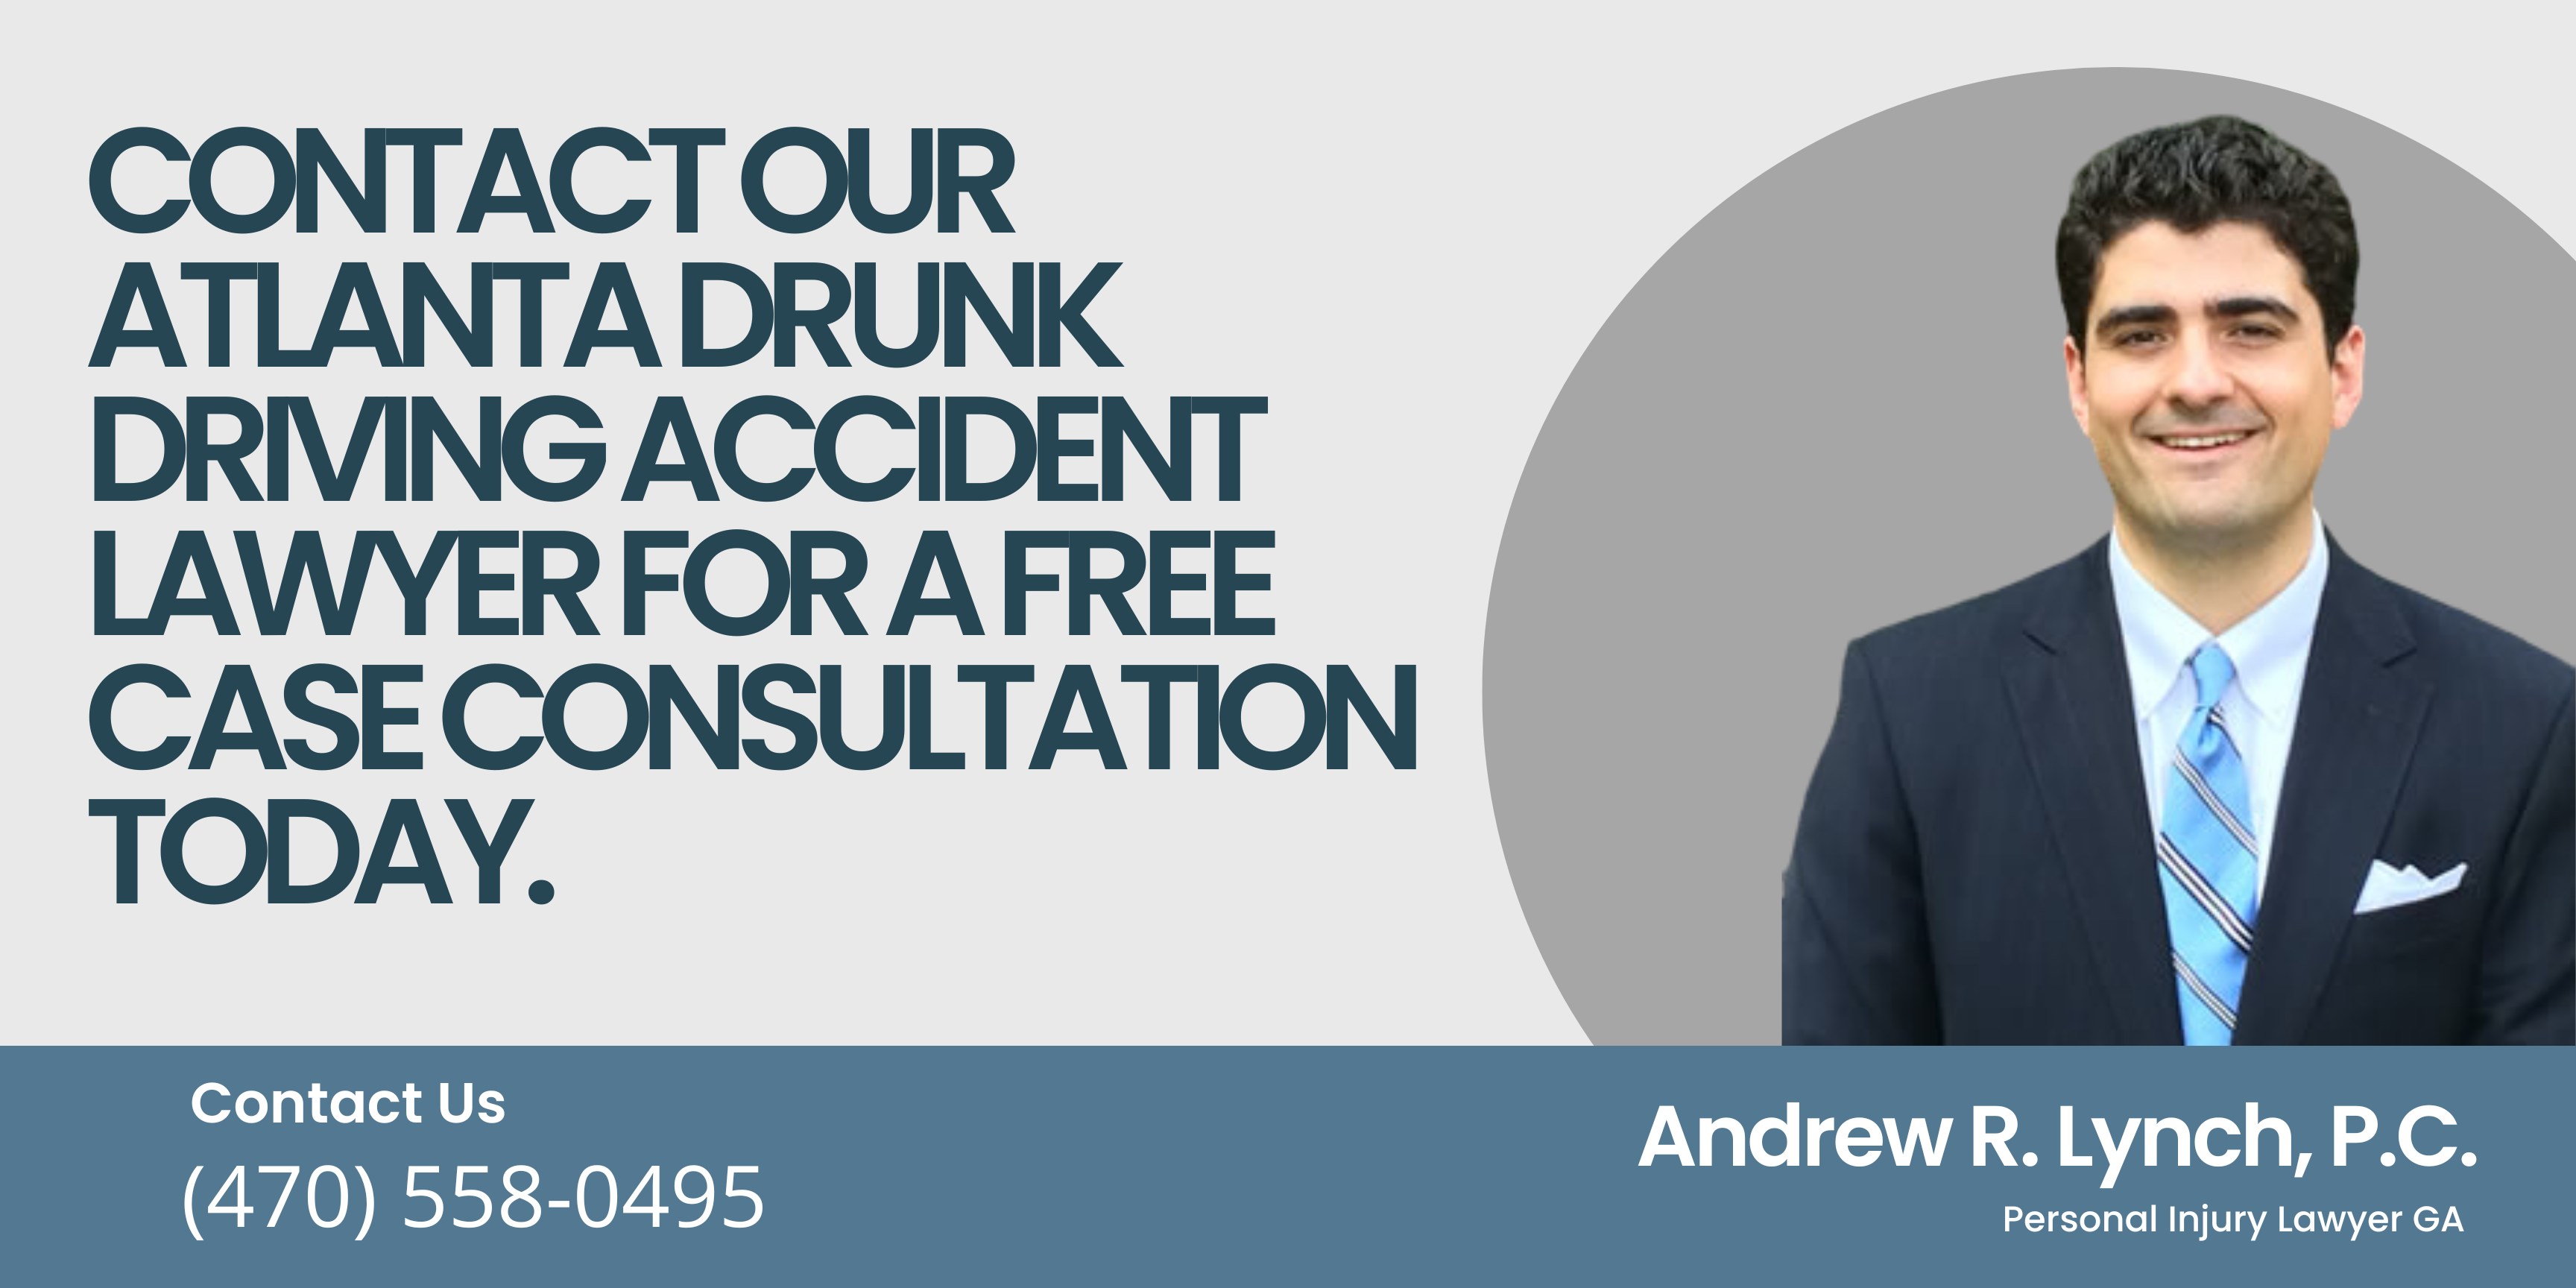 contact our Atlanta Drunk Driving Accident Lawyer